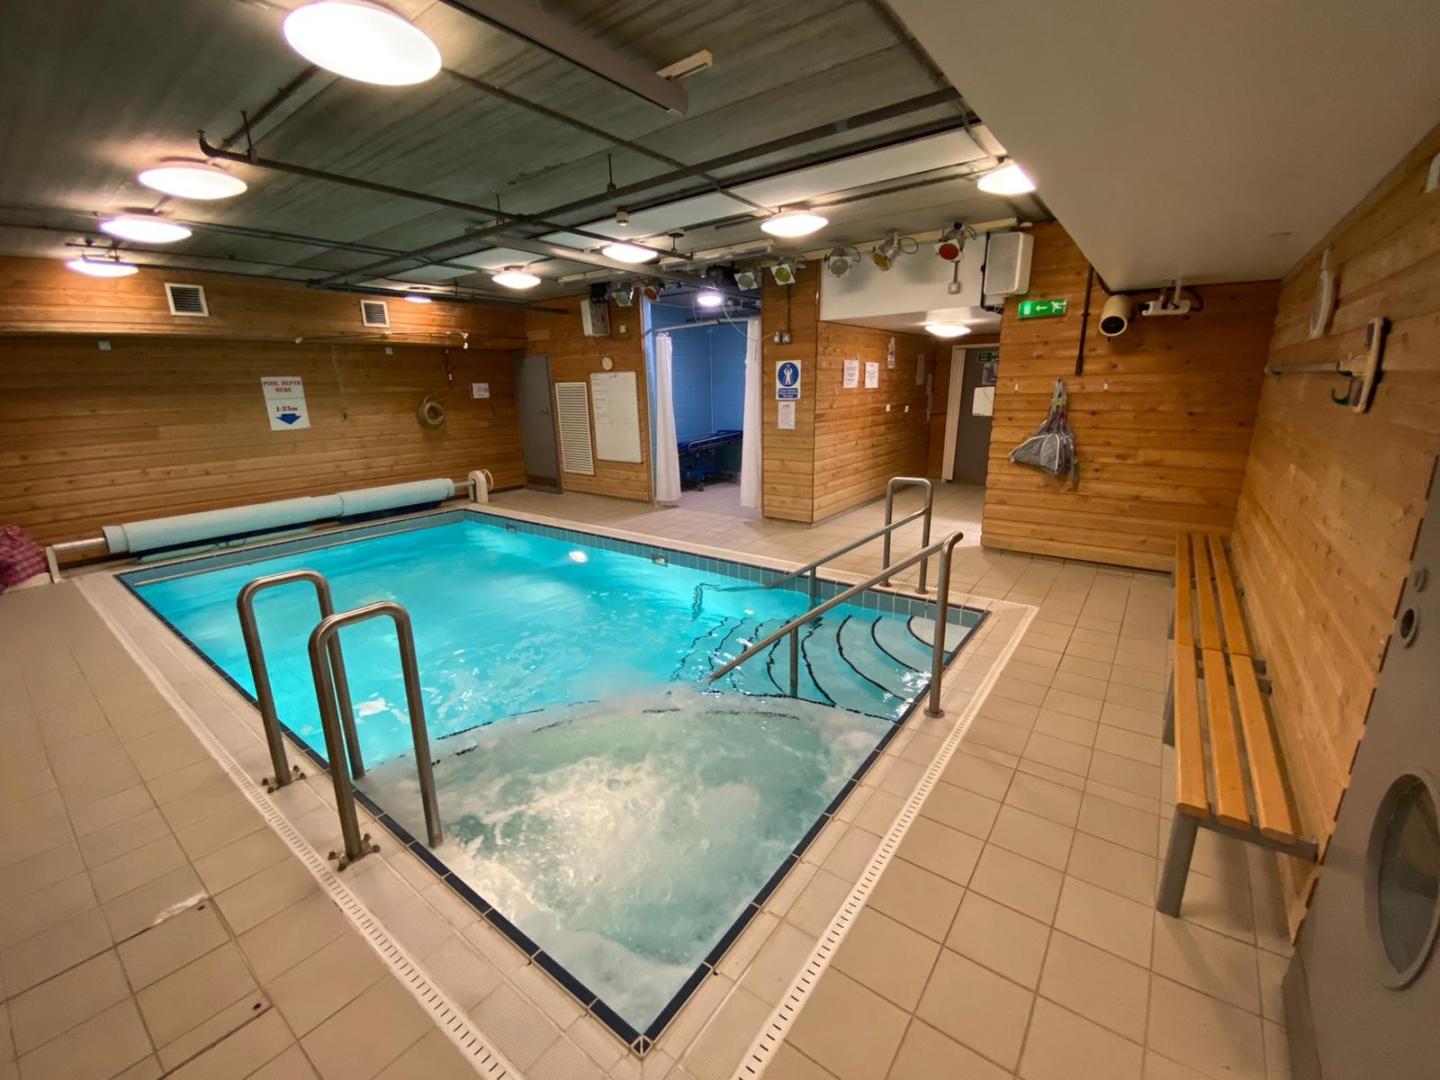 Image of an indoor swimming pool with a bench on the side